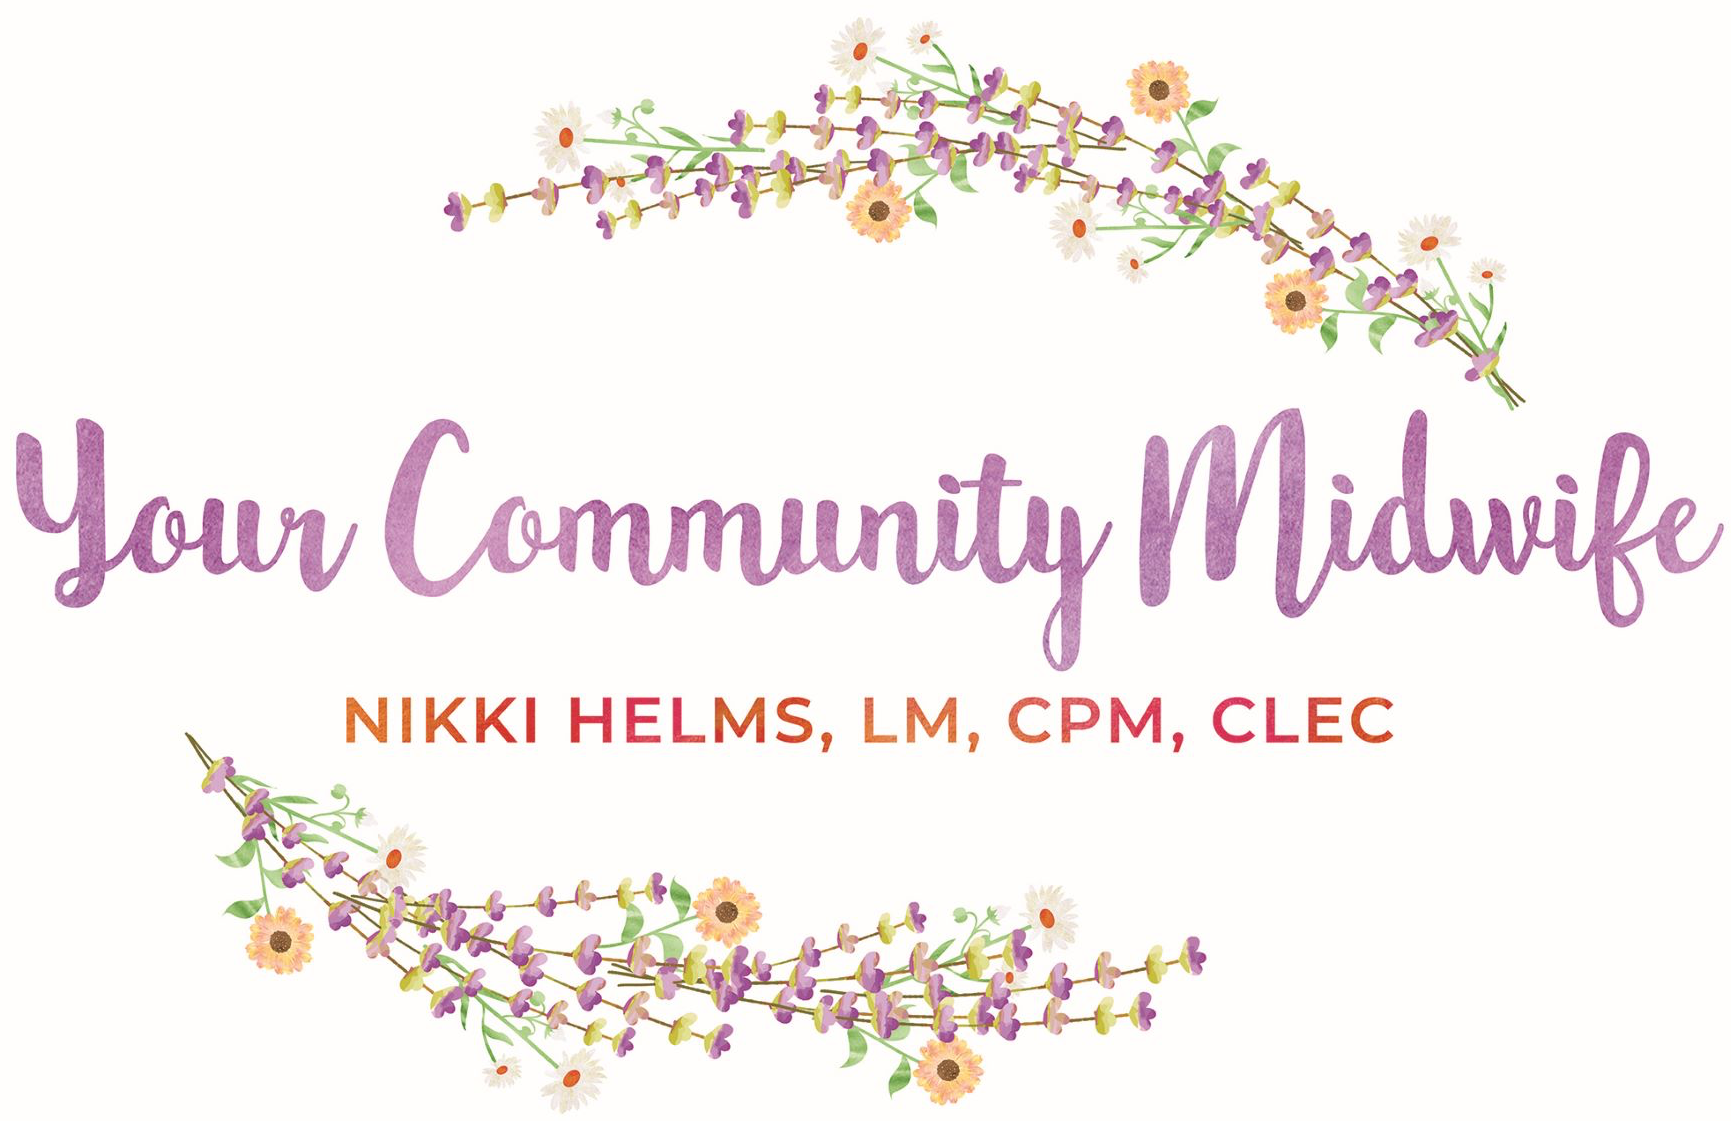 Your Community Midwife, Nikki Helms, LM, CPM, CLEC